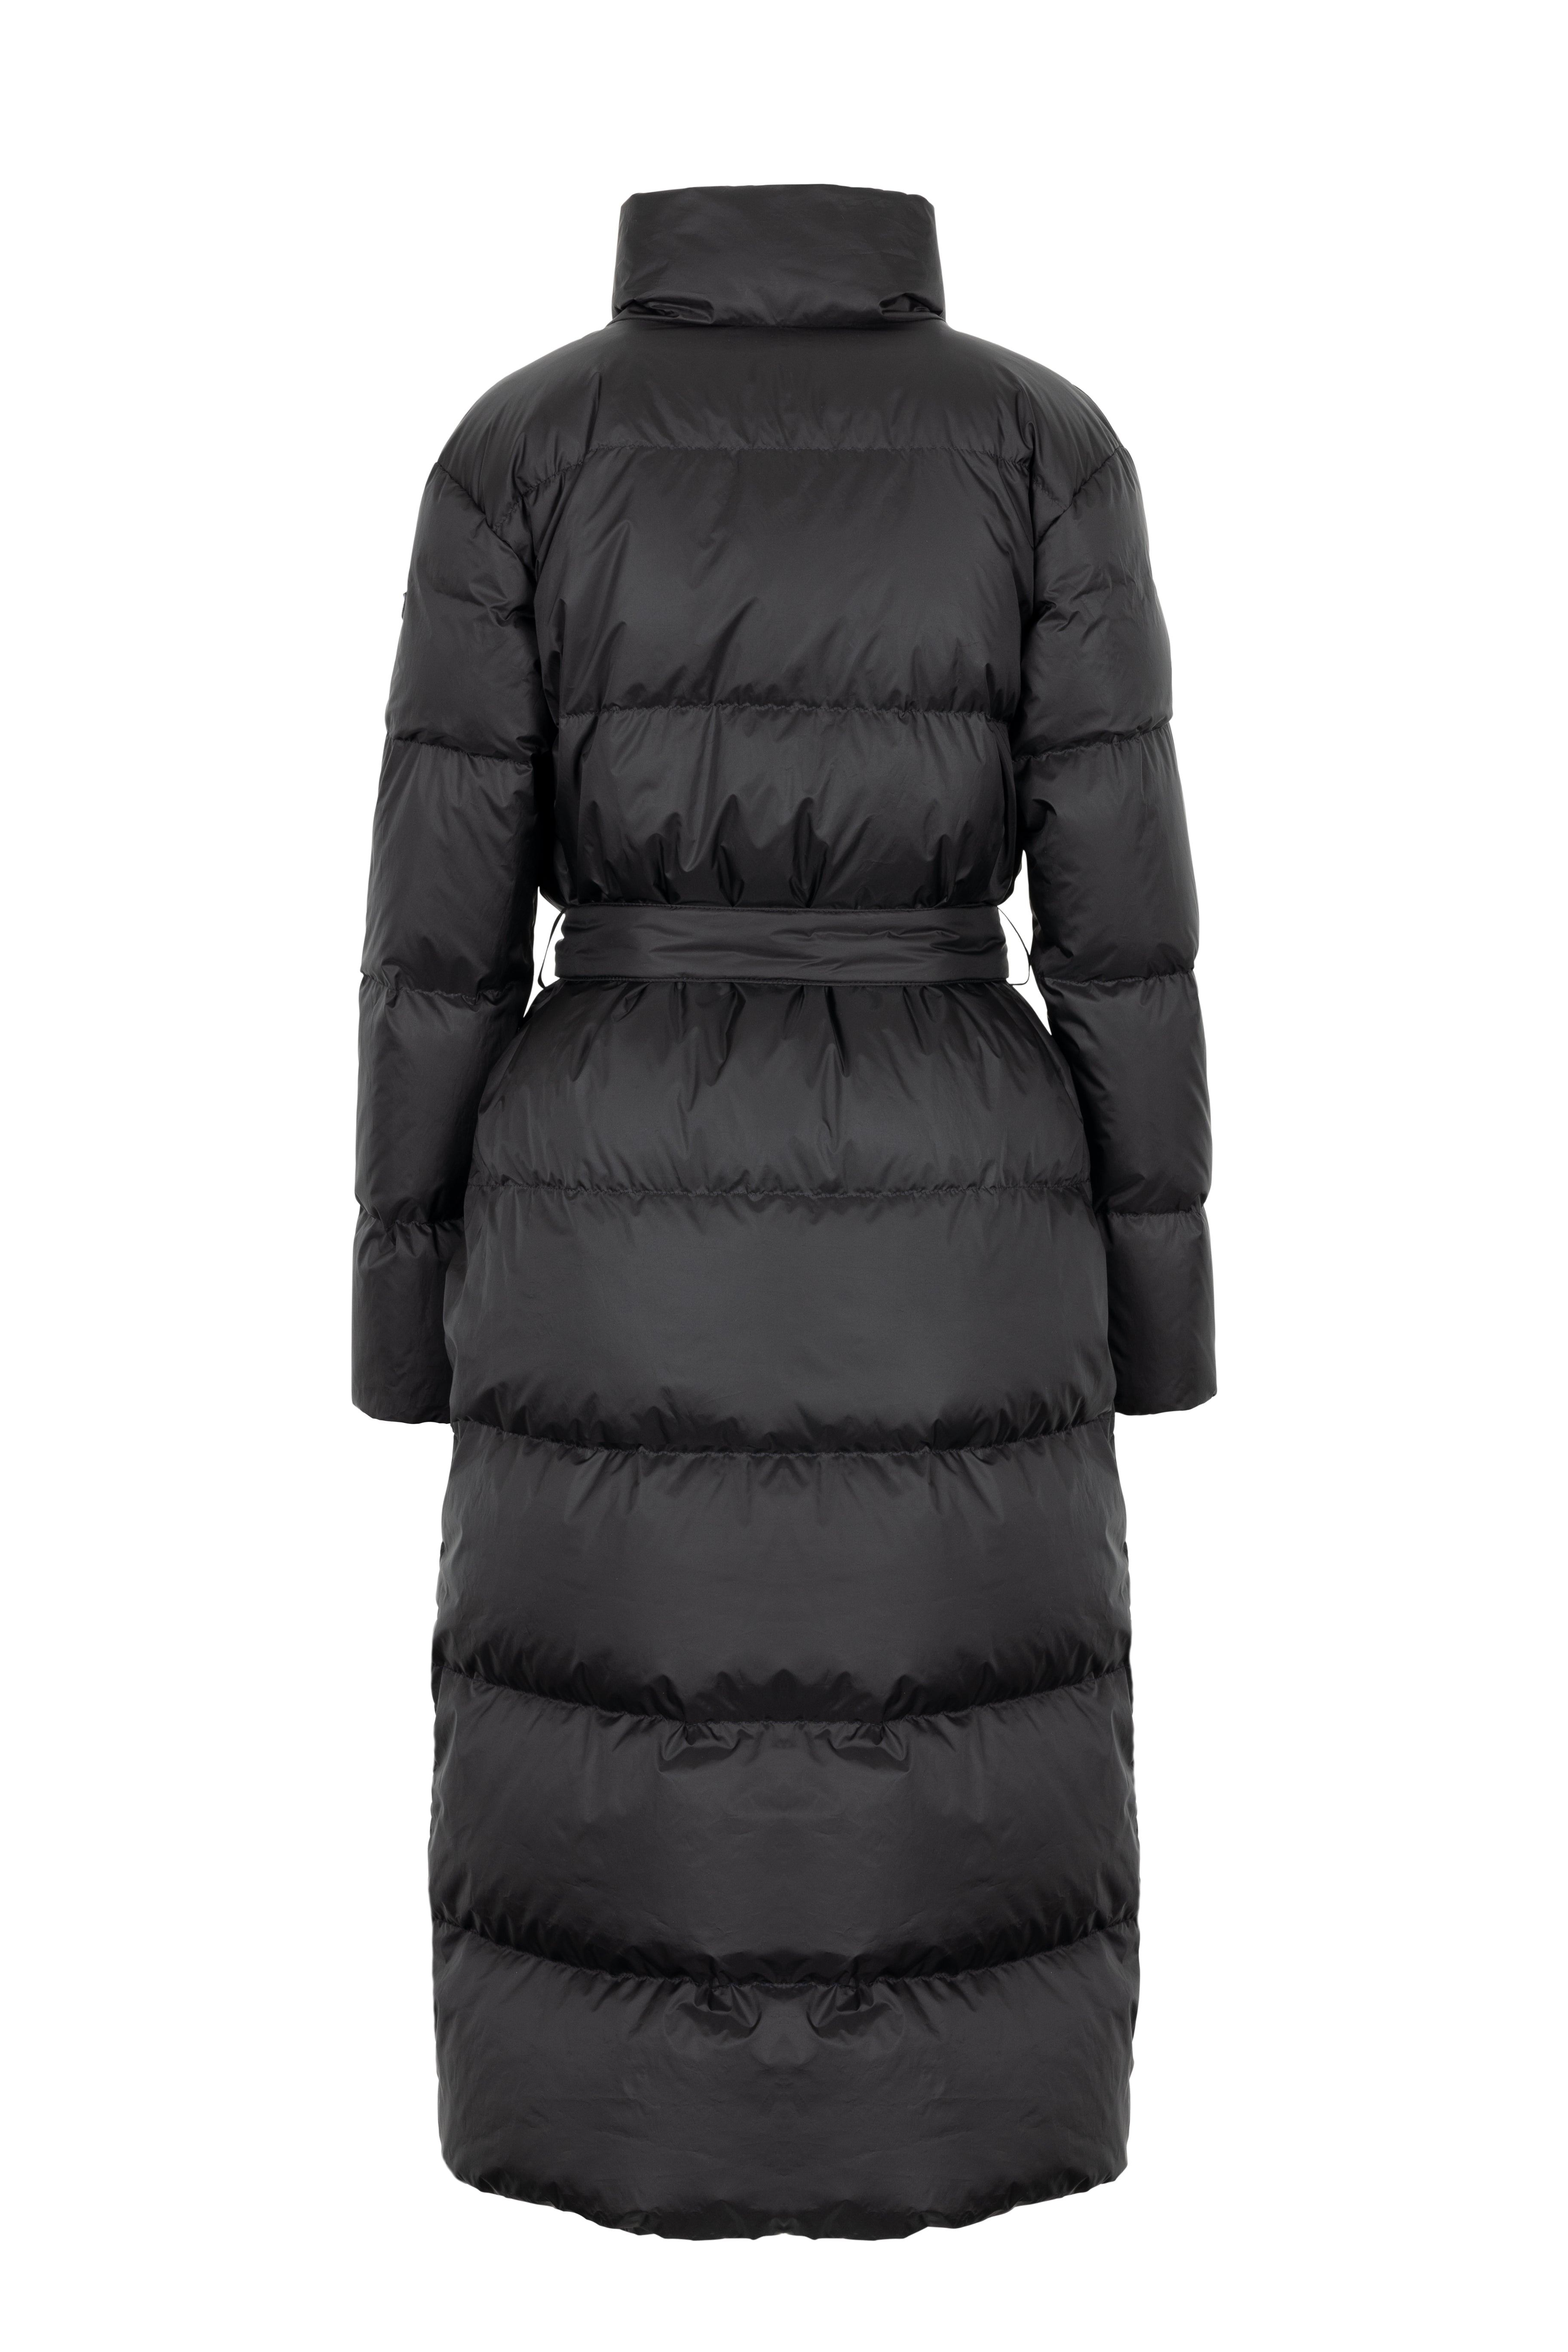 Long belted Lempelius down coat in the color black